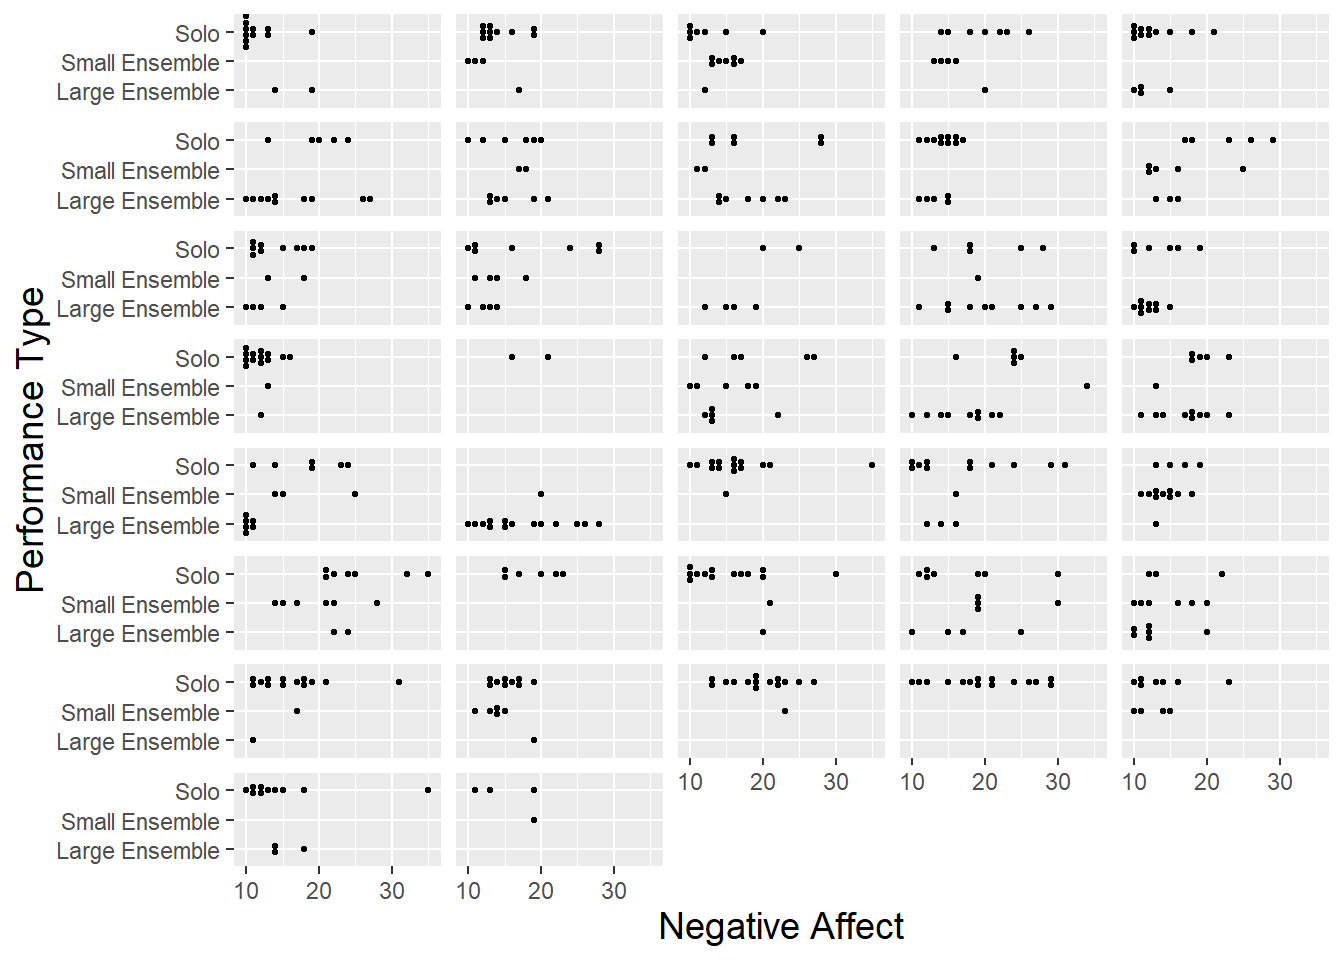 Lattice plot of performance type vs. negative affect, with separate dotplots by subject.